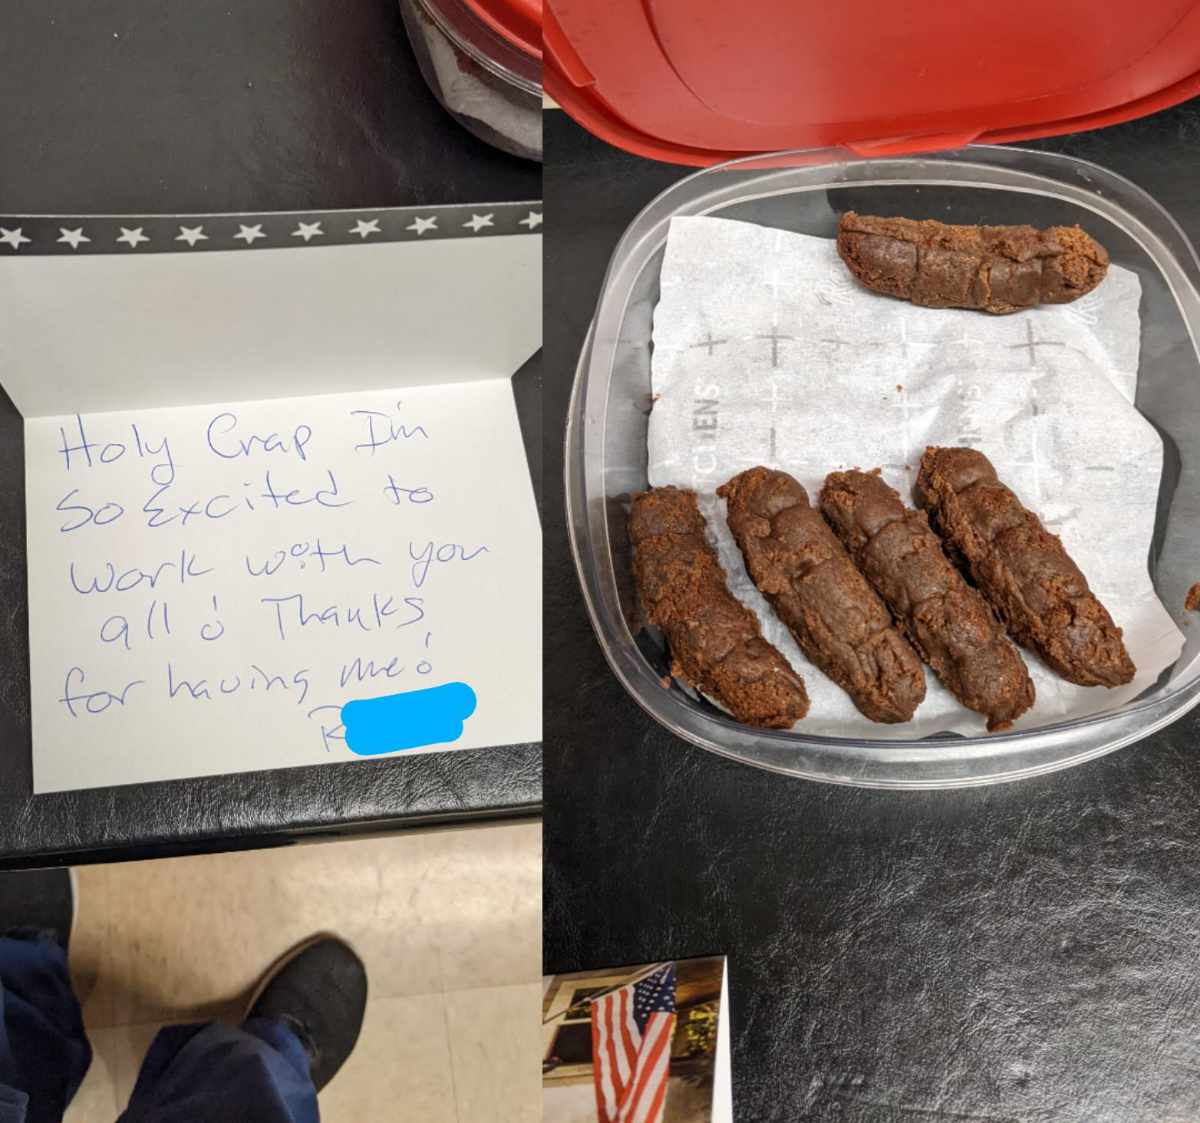 New employee starting today brought brownies in for everyone with this note